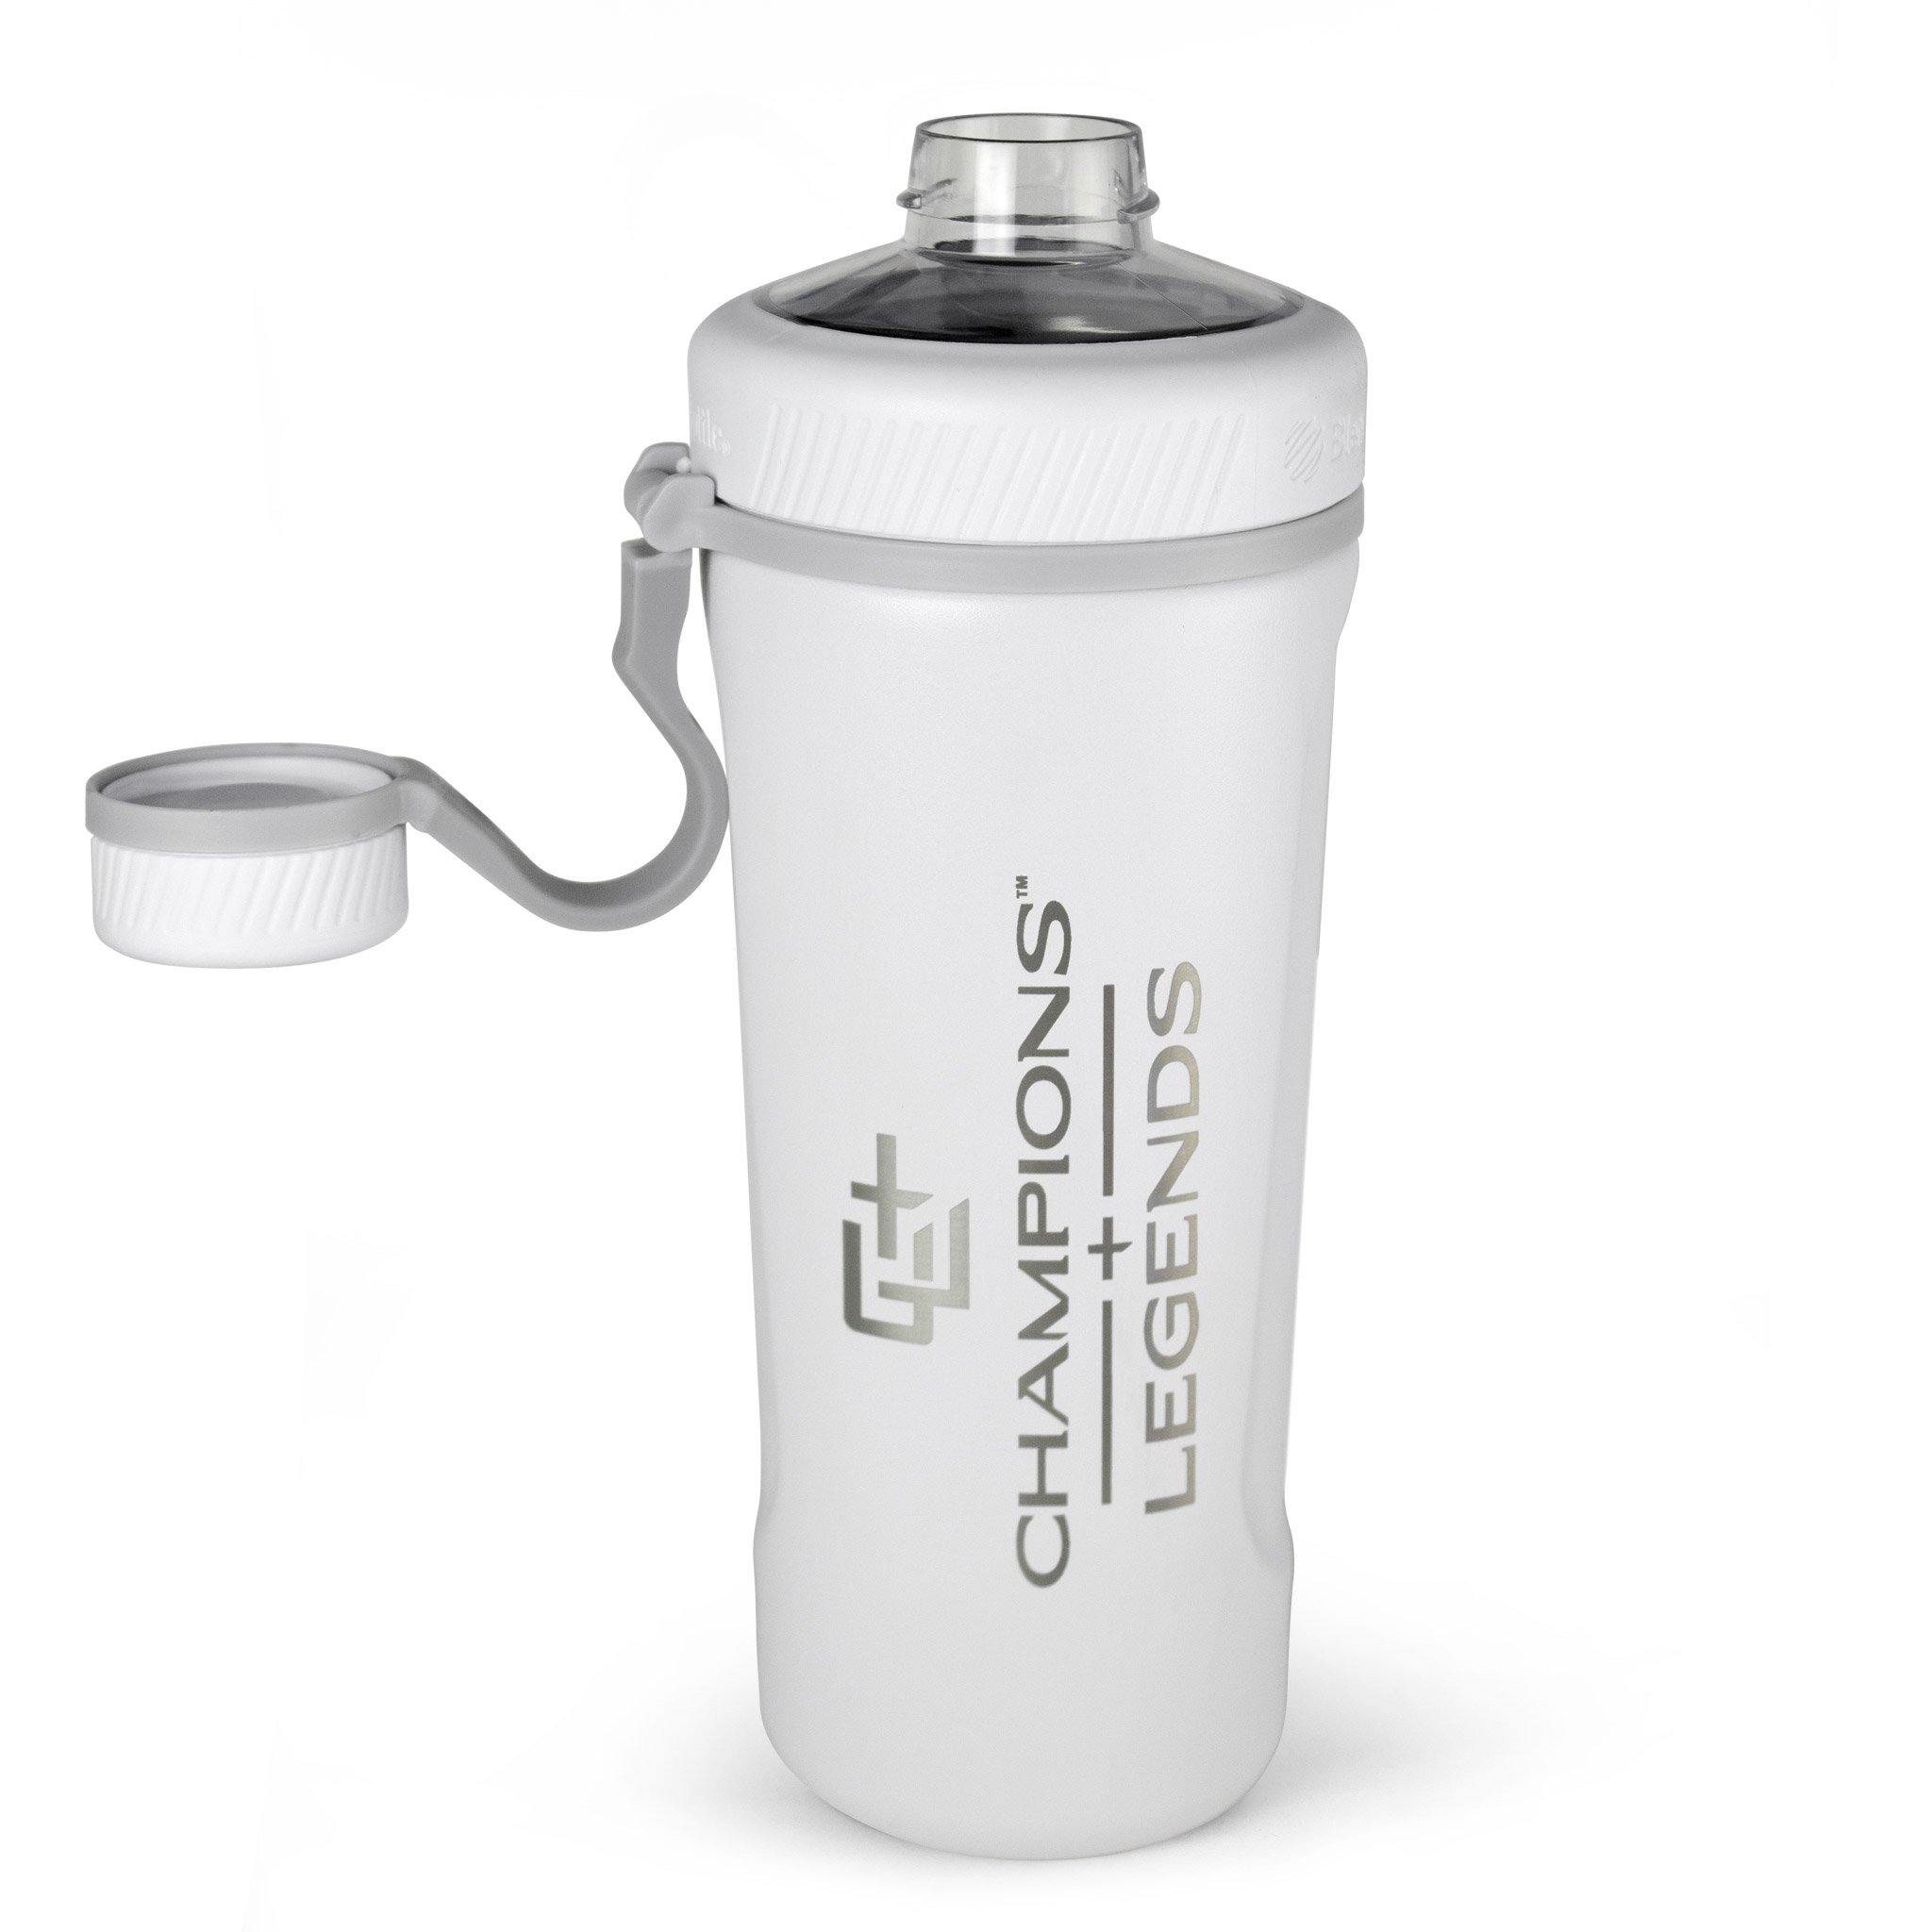 C+L Radian Stainless Steel Blender Bottle - Shake Your Smoohie, Use for  Post-Workout or for Leisure